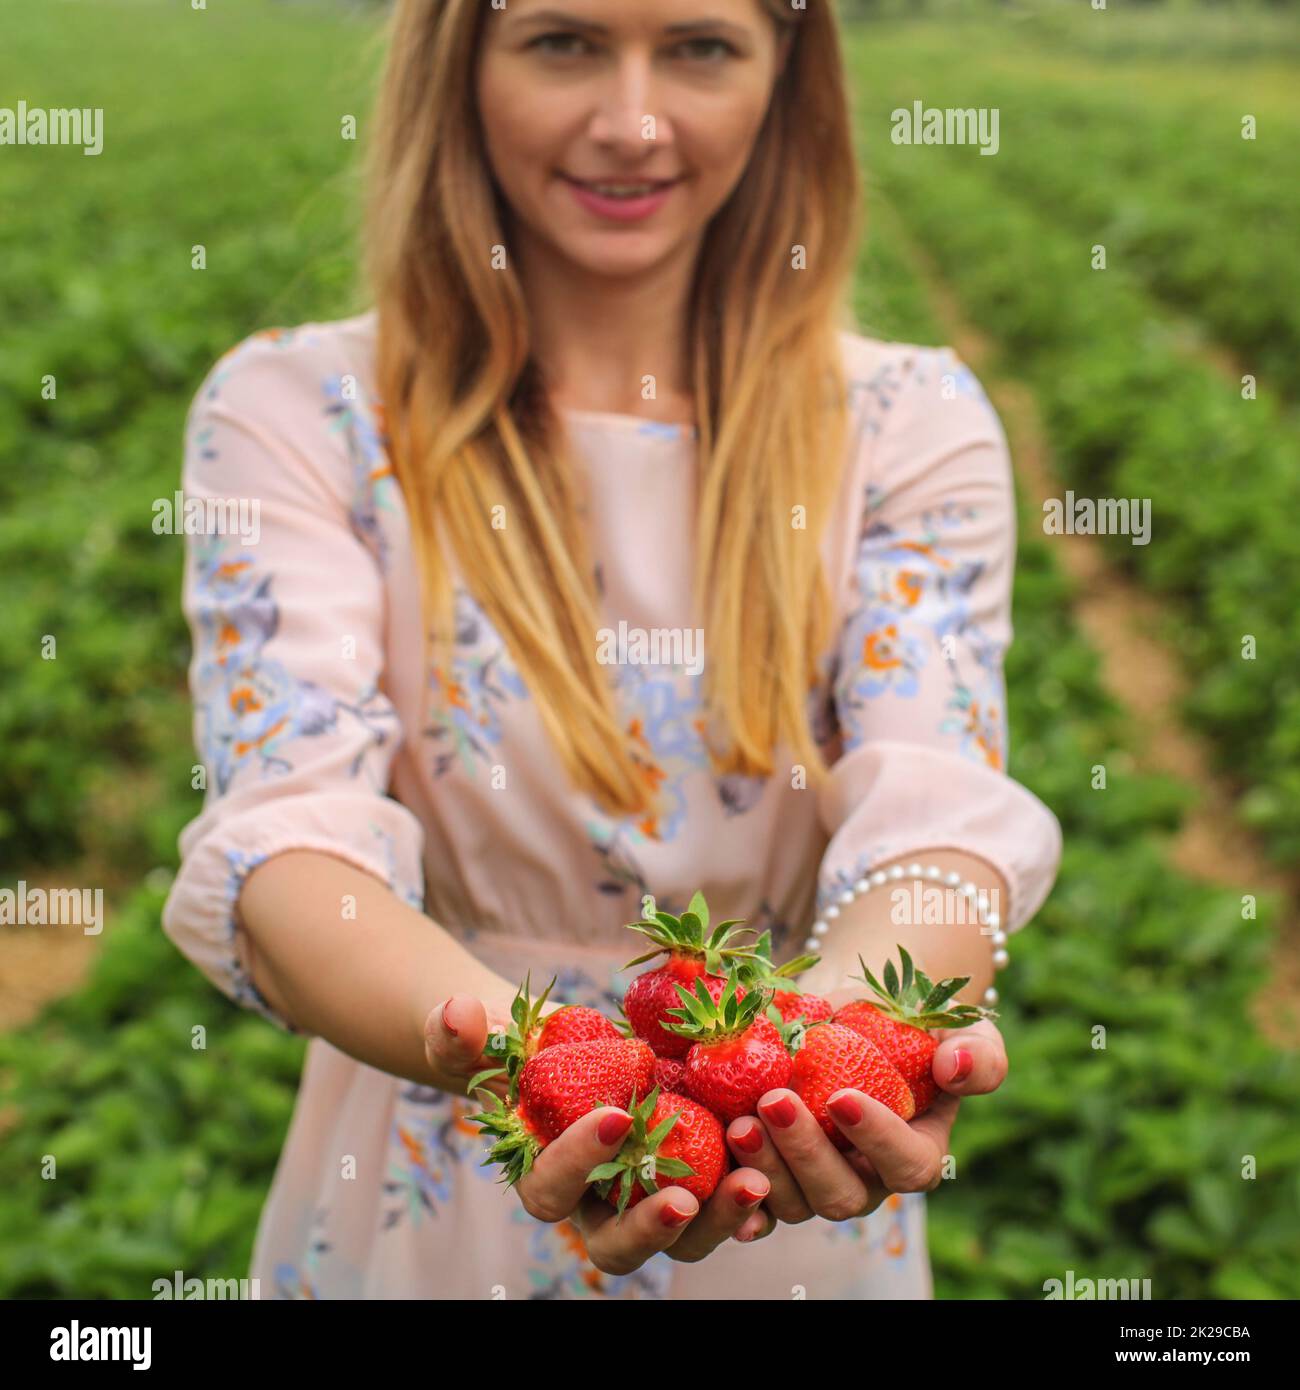 Young woman in pink dress holding two hands full of freshly picked strawberries, self harvesting strawberry farm in background. Stock Photo